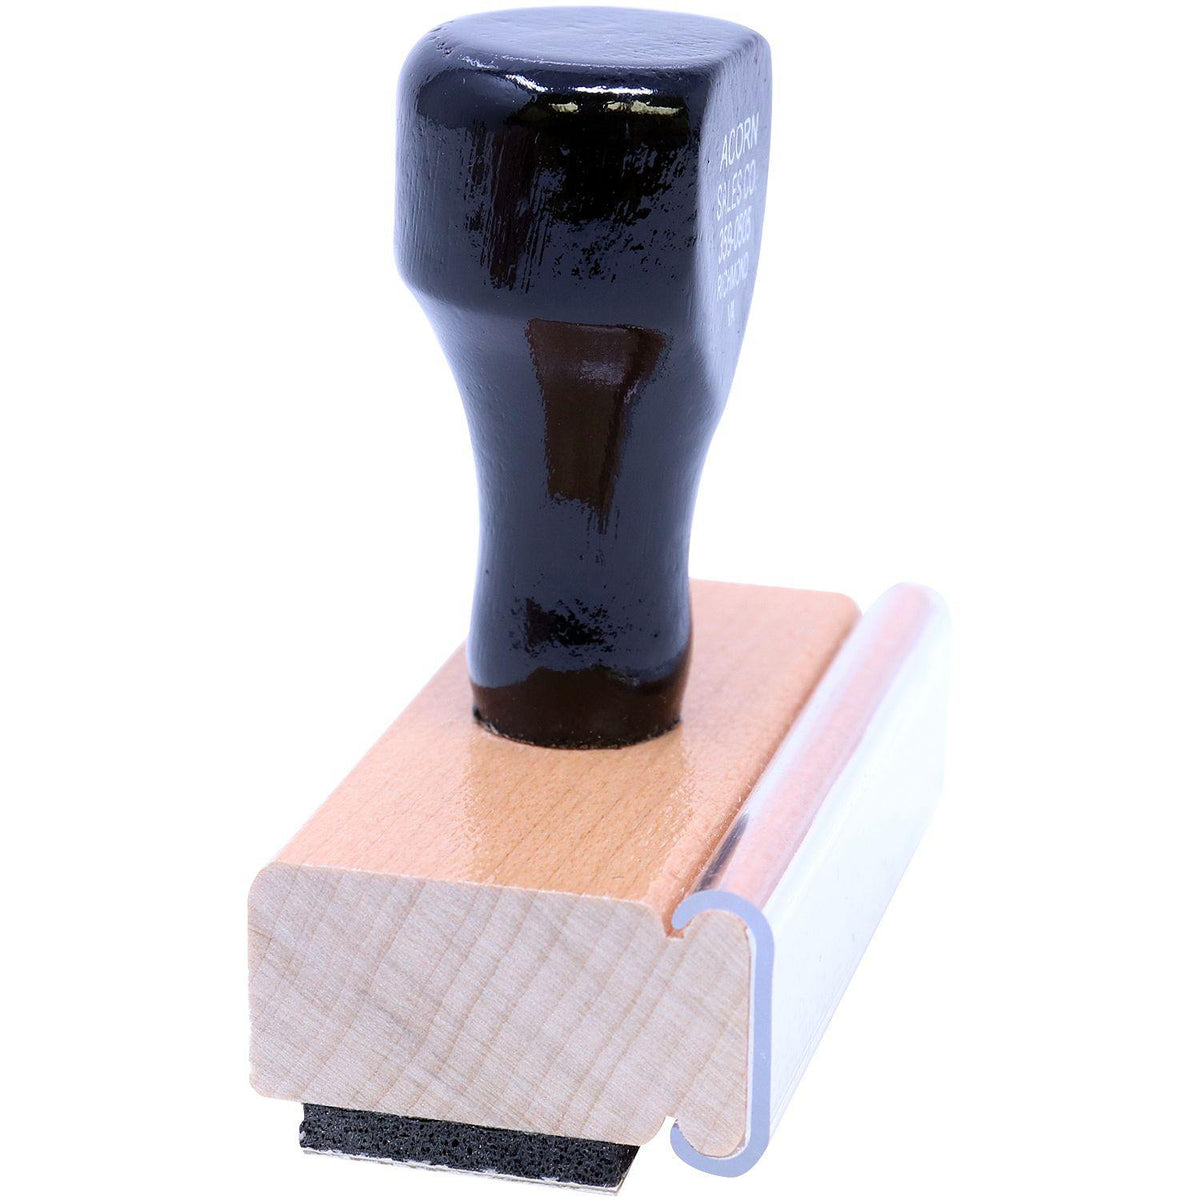 Side View of Faxed Rubber Stamp at an Angle